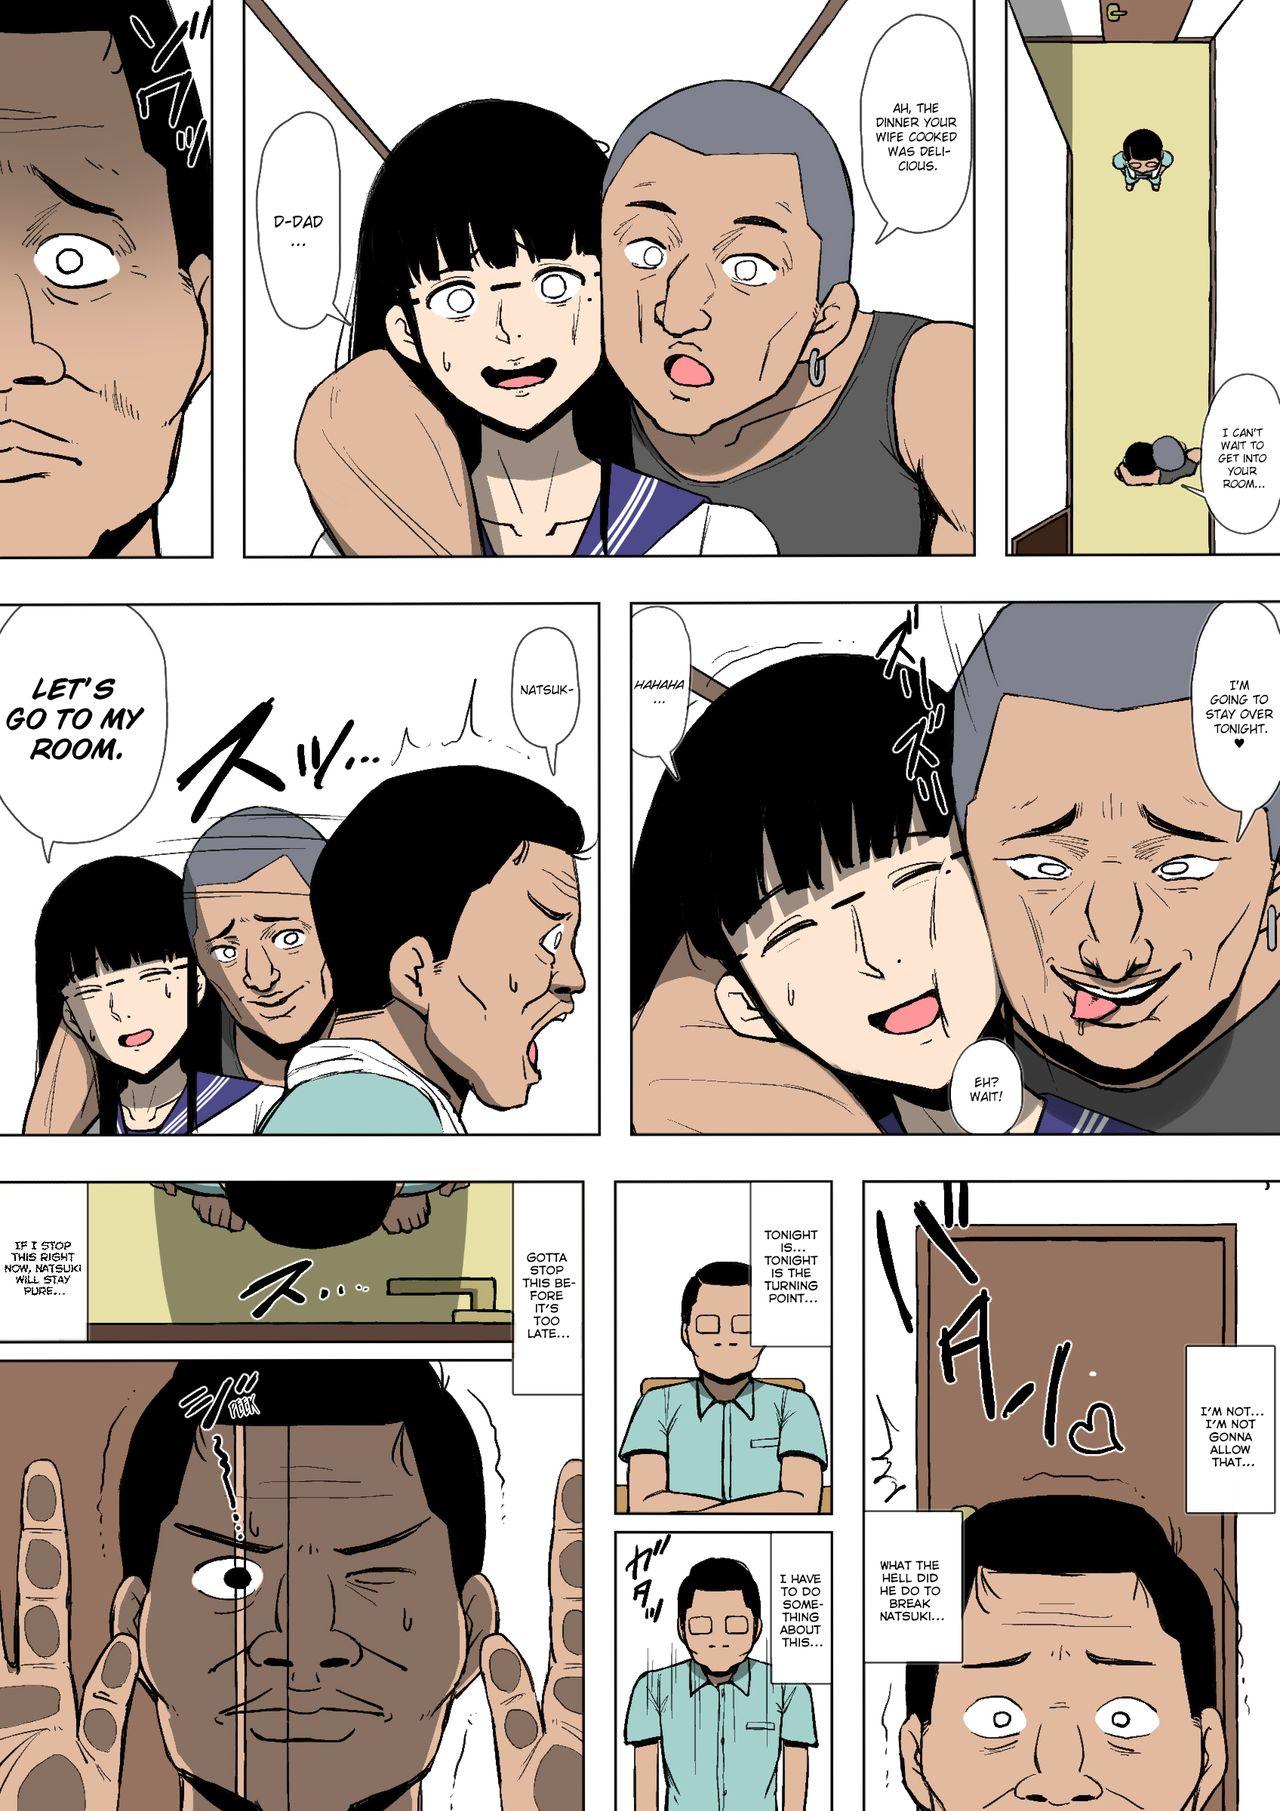 Musume ga Furyou ni Otosareteita | My Daughter was Corrupted by a Delinquent 20